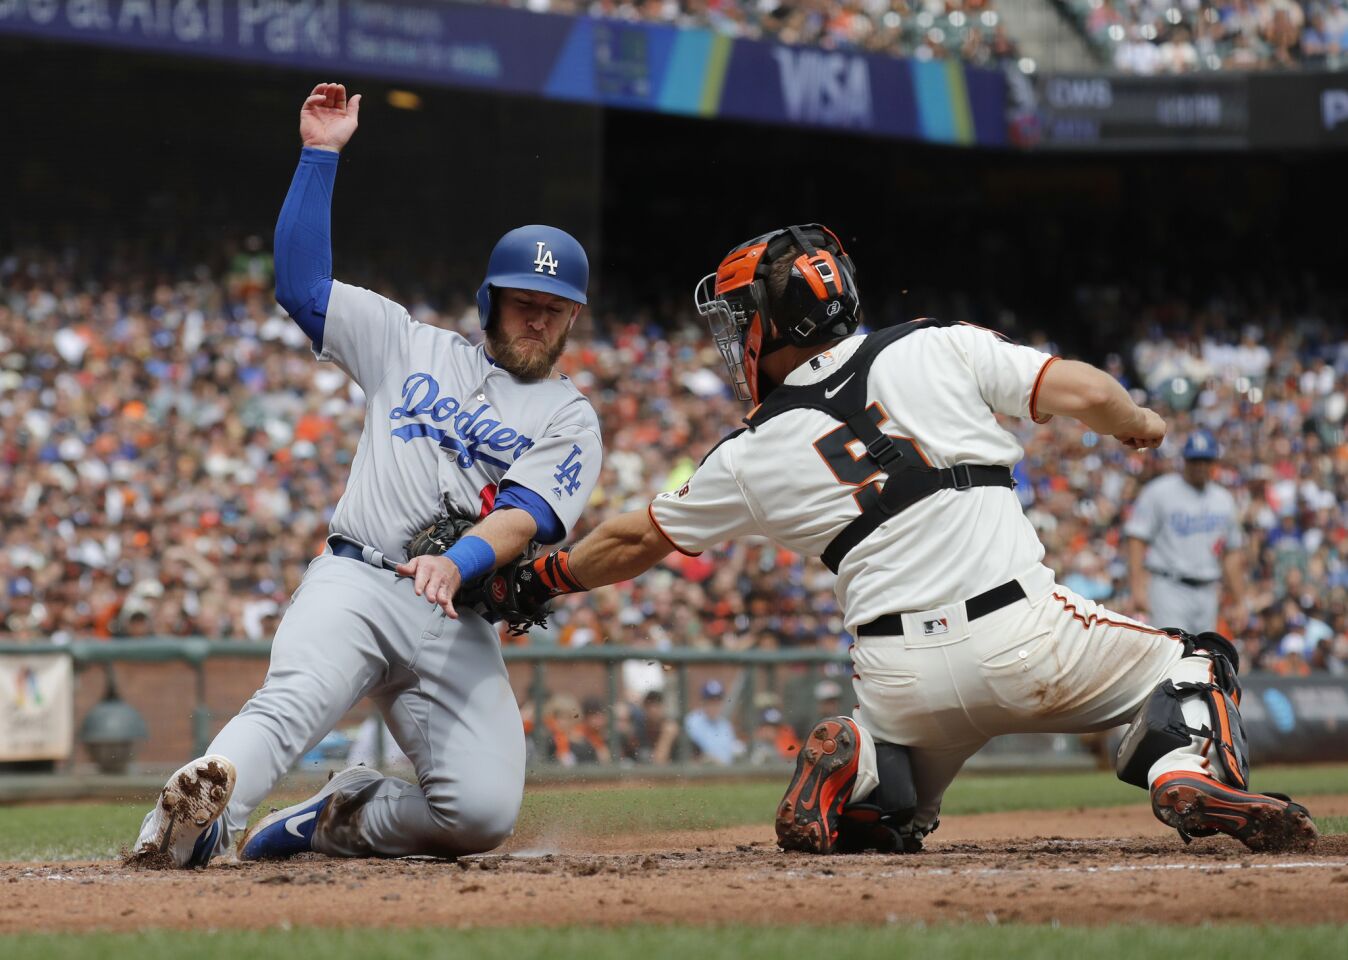 San Francisco Giants catcher Nick Hundley (5) tags out Los Angeles Dodgers' Max Muncy (13) at home during the third inning of a baseball game in San Francisco, Saturday, Sept. 29, 2018. (AP Photo/Jim Gensheimer)